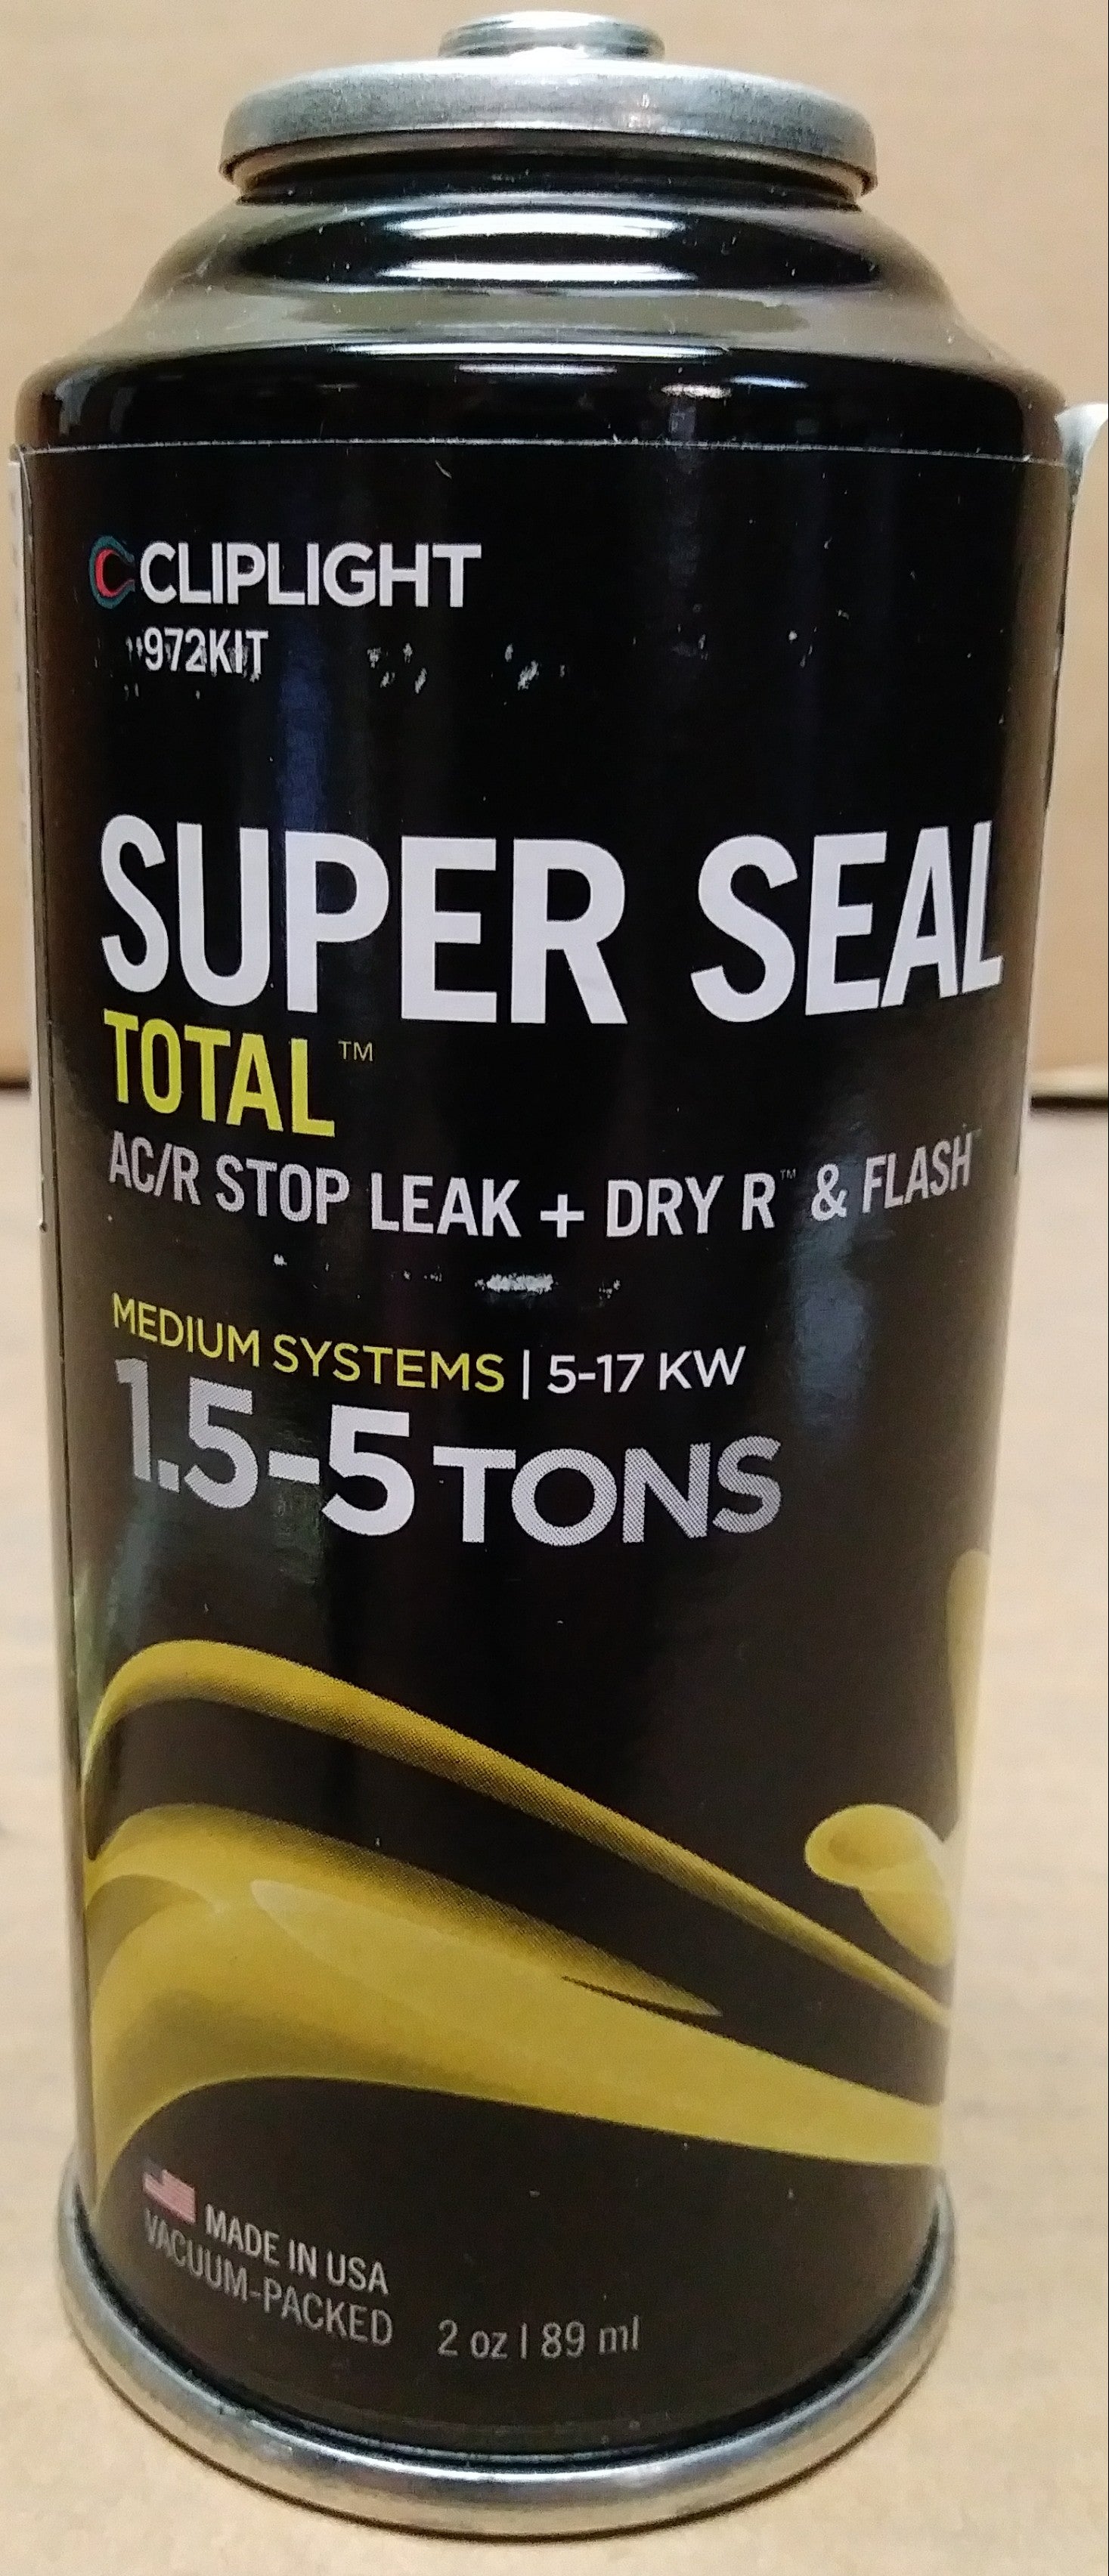 SUPER SEAL TOTAL AC/R STOP LEAK + DRY R AND FLASH, FOR MEDIUM SYSTEMS